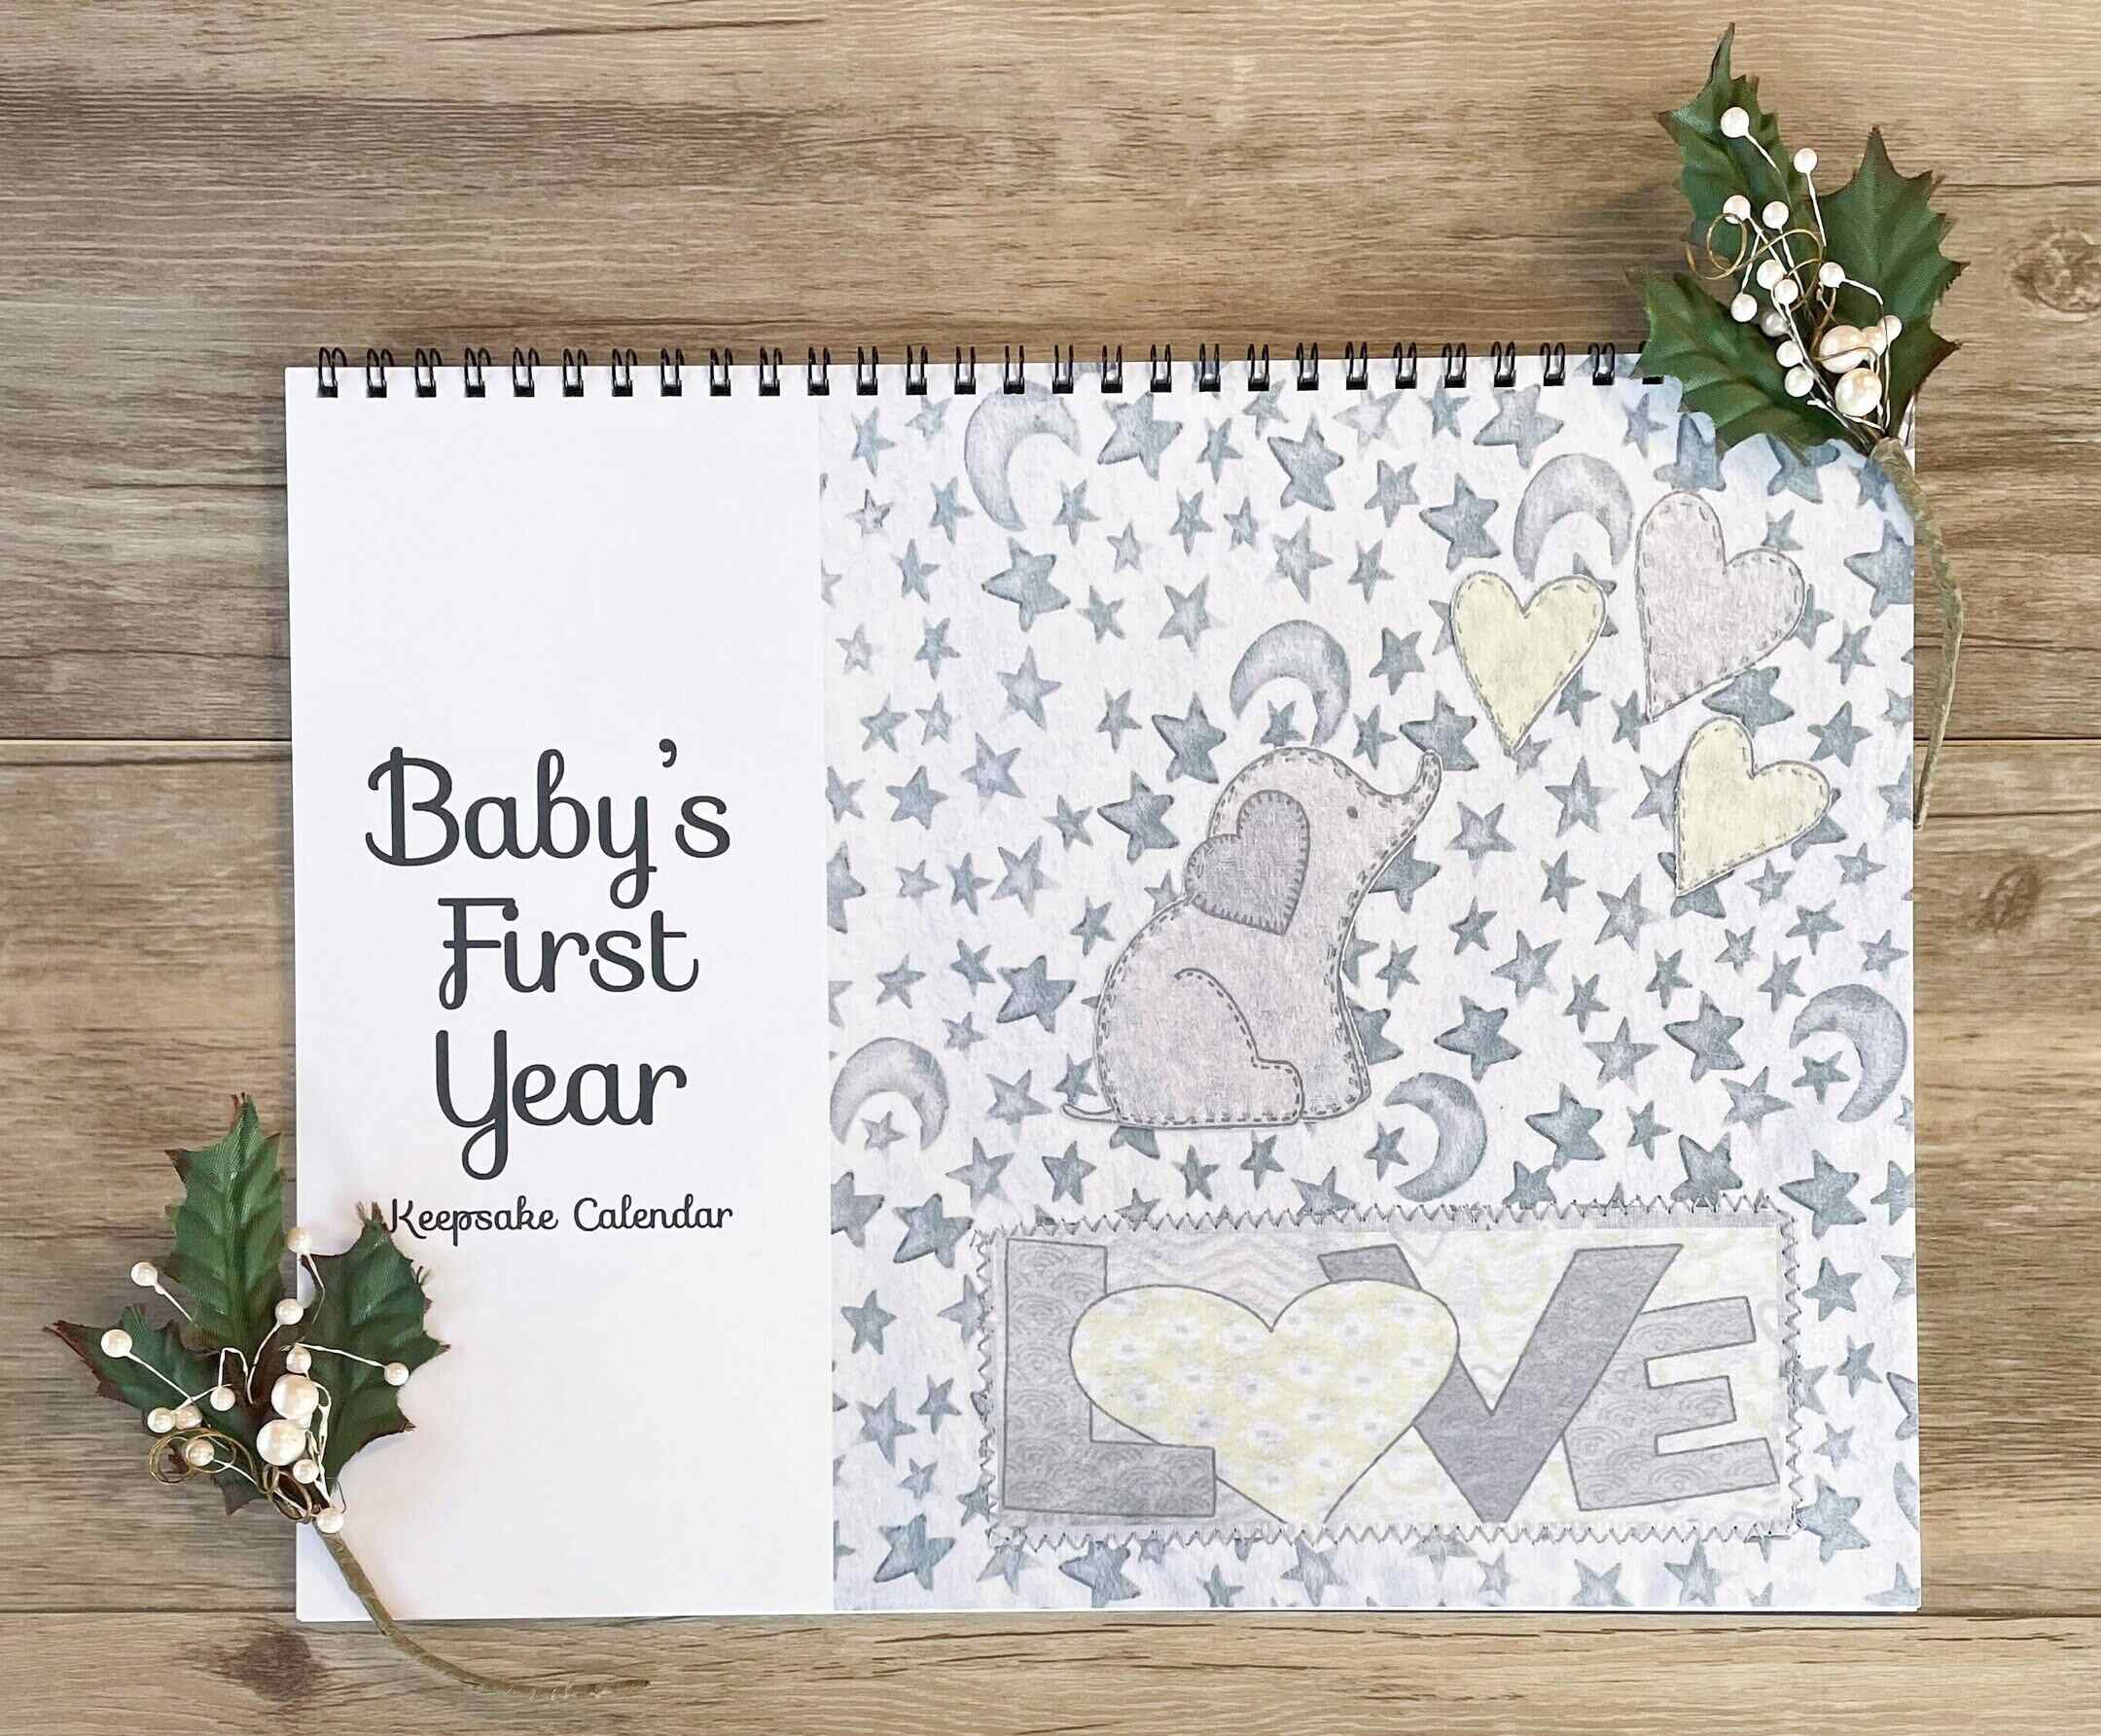 Review: Baby’s First Year Calendar